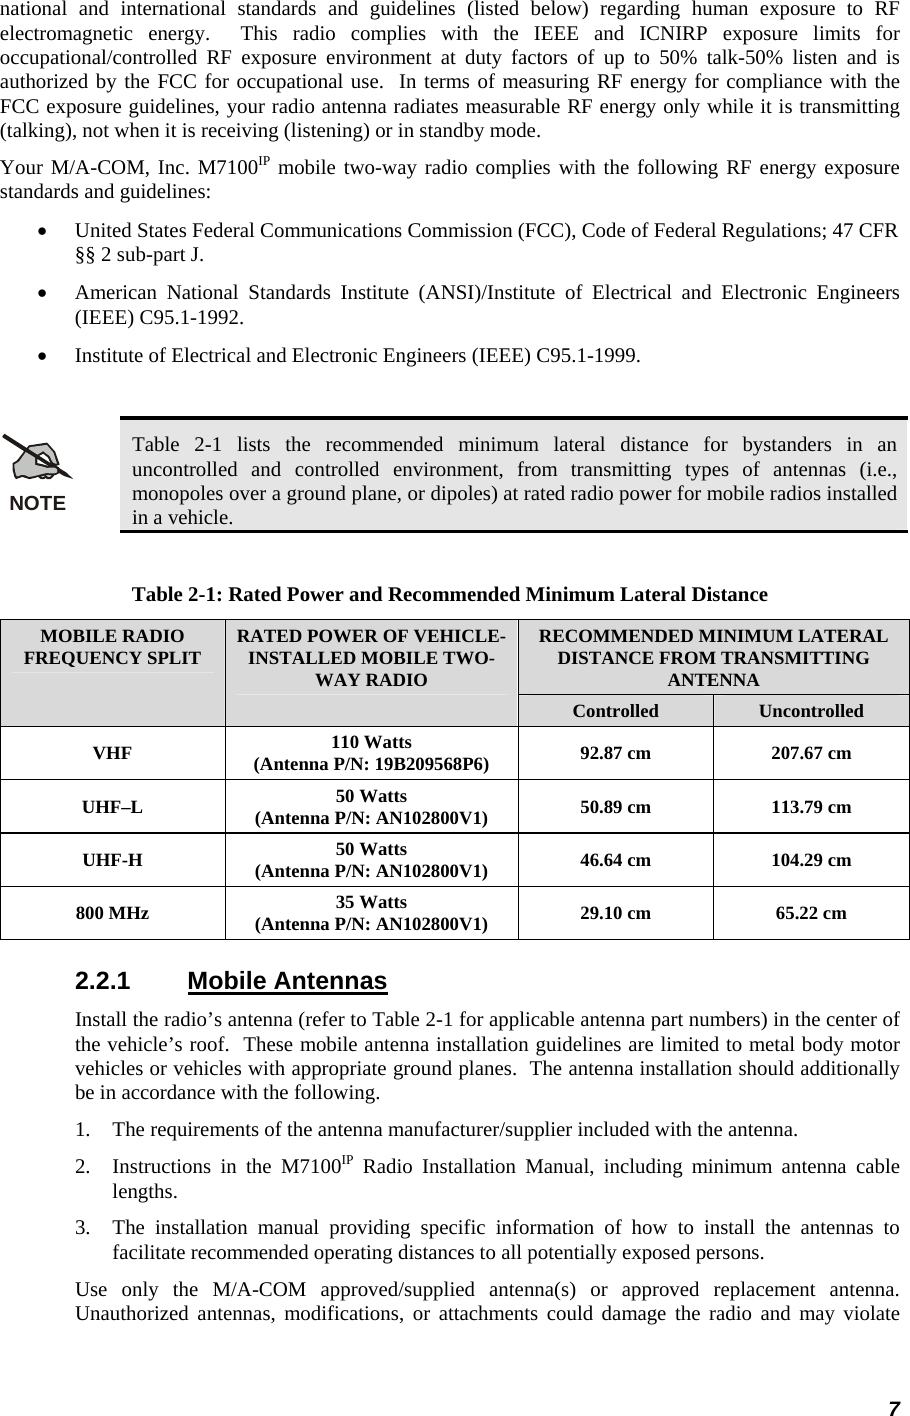 7 national and international standards and guidelines (listed below) regarding human exposure to RF electromagnetic energy.  This radio complies with the IEEE and ICNIRP exposure limits for occupational/controlled RF exposure environment at duty factors of up to 50% talk-50% listen and is authorized by the FCC for occupational use.  In terms of measuring RF energy for compliance with the FCC exposure guidelines, your radio antenna radiates measurable RF energy only while it is transmitting (talking), not when it is receiving (listening) or in standby mode. Your M/A-COM, Inc. M7100IP mobile two-way radio complies with the following RF energy exposure standards and guidelines: •  United States Federal Communications Commission (FCC), Code of Federal Regulations; 47 CFR §§ 2 sub-part J. •  American National Standards Institute (ANSI)/Institute of Electrical and Electronic Engineers (IEEE) C95.1-1992. •  Institute of Electrical and Electronic Engineers (IEEE) C95.1-1999.  NOTE Table 2-1 lists the recommended minimum lateral distance for bystanders in an uncontrolled and controlled environment, from transmitting types of antennas (i.e., monopoles over a ground plane, or dipoles) at rated radio power for mobile radios installed in a vehicle.  Table 2-1: Rated Power and Recommended Minimum Lateral Distance RECOMMENDED MINIMUM LATERAL DISTANCE FROM TRANSMITTING ANTENNA MOBILE RADIO FREQUENCY SPLIT  RATED POWER OF VEHICLE-INSTALLED MOBILE TWO-WAY RADIO Controlled  Uncontrolled VHF  110 Watts (Antenna P/N: 19B209568P6)  92.87 cm  207.67 cm UHF–L  50 Watts (Antenna P/N: AN102800V1)  50.89 cm  113.79 cm UHF-H  50 Watts (Antenna P/N: AN102800V1)  46.64 cm  104.29 cm 800 MHz  35 Watts (Antenna P/N: AN102800V1)  29.10 cm  65.22 cm 2.2.1 Mobile Antennas Install the radio’s antenna (refer to Table 2-1 for applicable antenna part numbers) in the center of the vehicle’s roof.  These mobile antenna installation guidelines are limited to metal body motor vehicles or vehicles with appropriate ground planes.  The antenna installation should additionally be in accordance with the following. 1.  The requirements of the antenna manufacturer/supplier included with the antenna. 2.  Instructions in the M7100IP Radio Installation Manual, including minimum antenna cable lengths. 3.  The installation manual providing specific information of how to install the antennas to facilitate recommended operating distances to all potentially exposed persons. Use only the M/A-COM approved/supplied antenna(s) or approved replacement antenna.  Unauthorized antennas, modifications, or attachments could damage the radio and may violate 